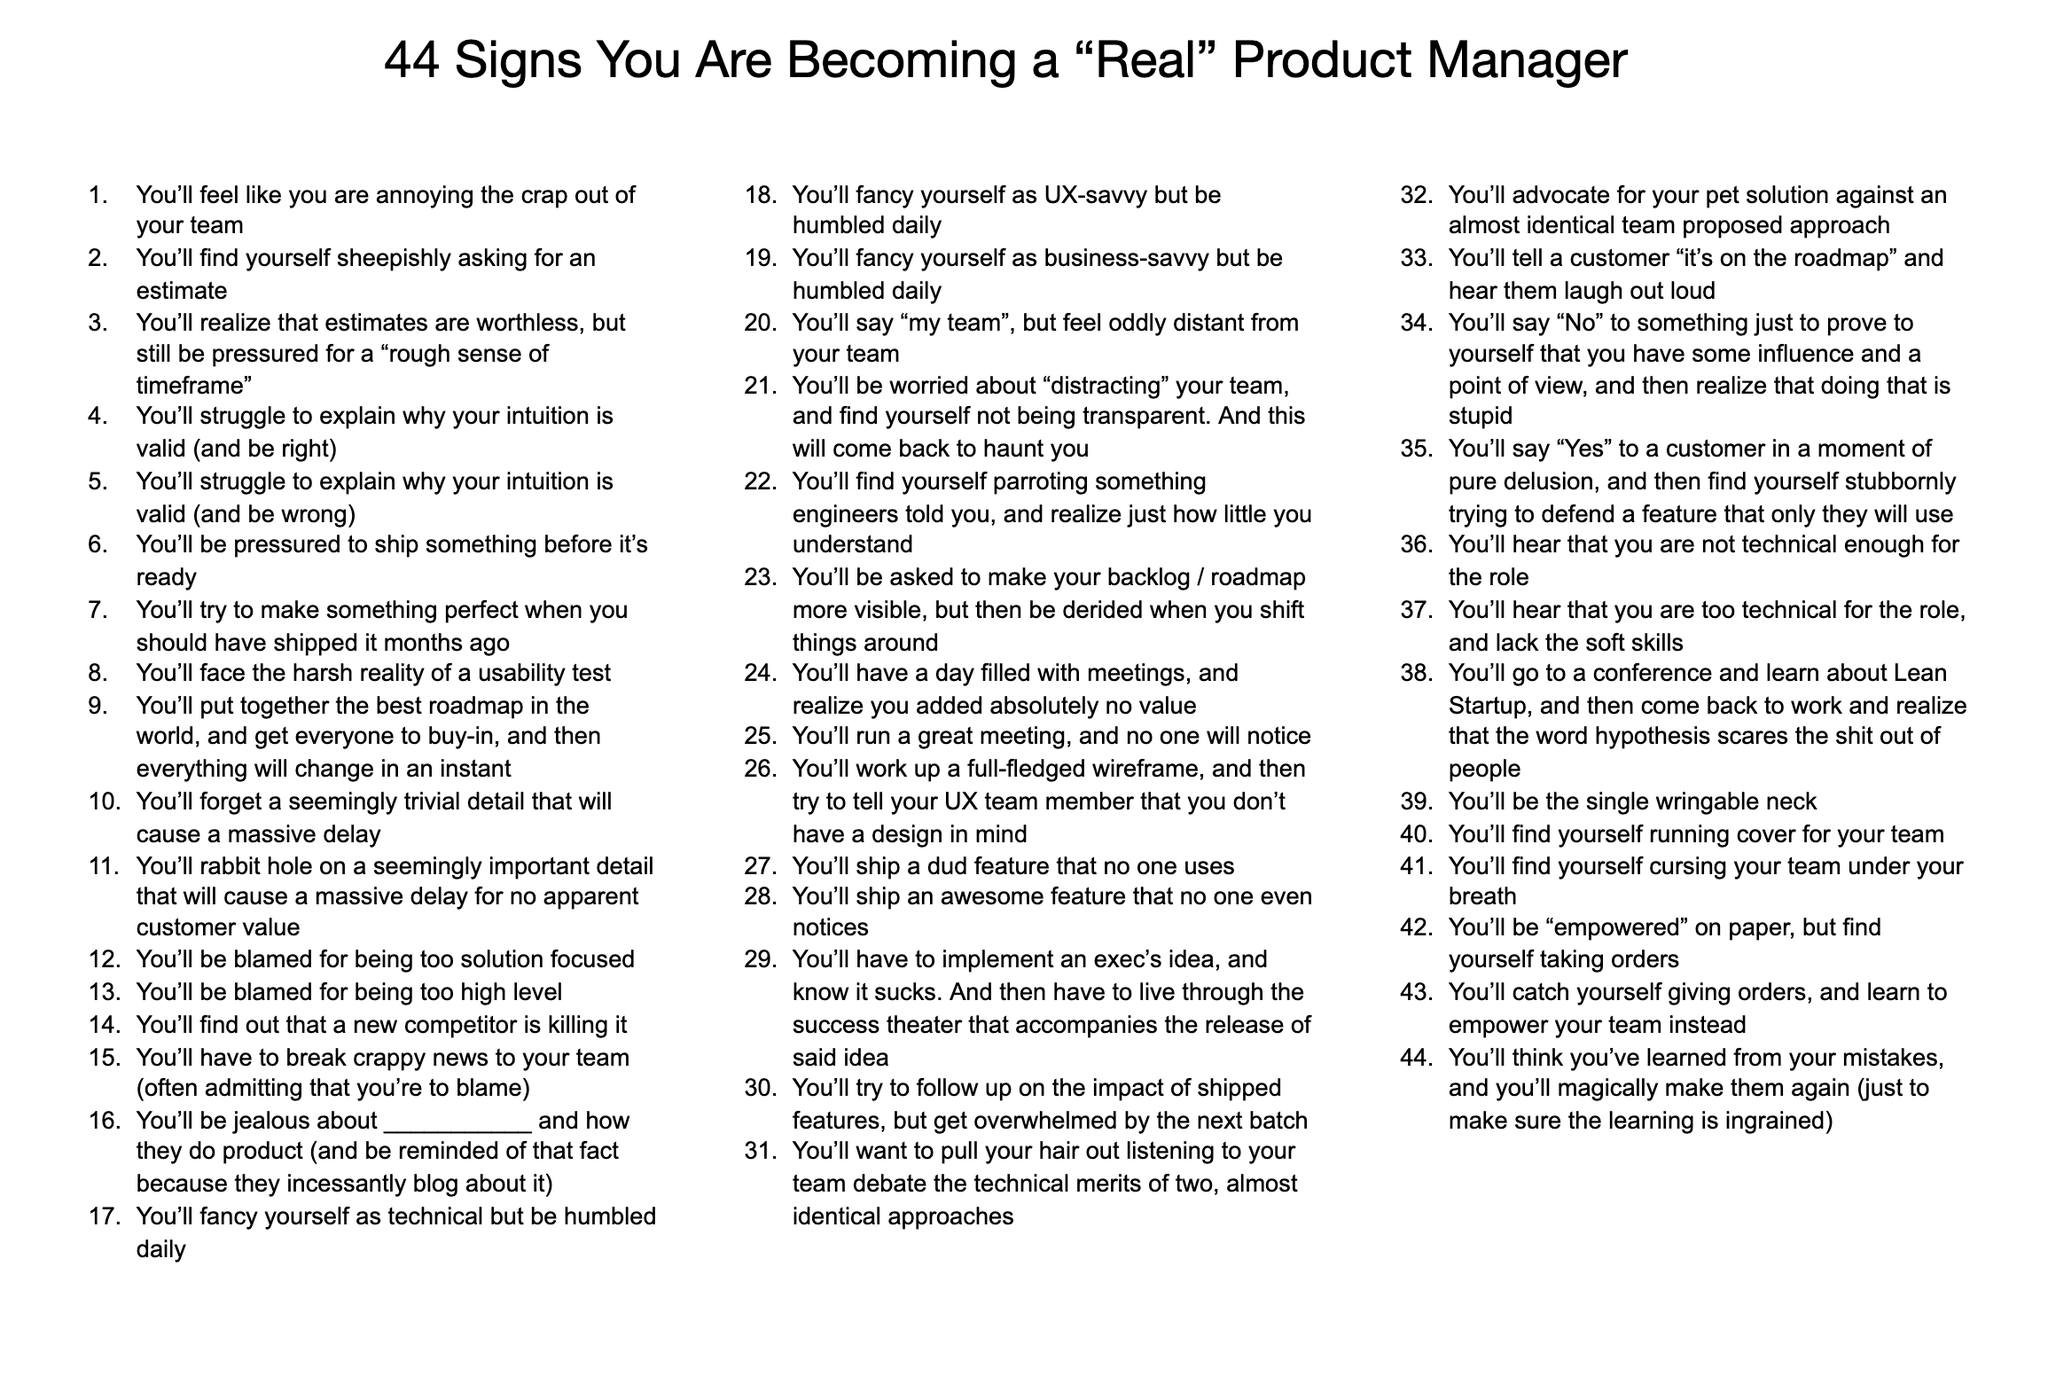 44 Signs You Are Becoming a “Real” Product Manager – Bram.us